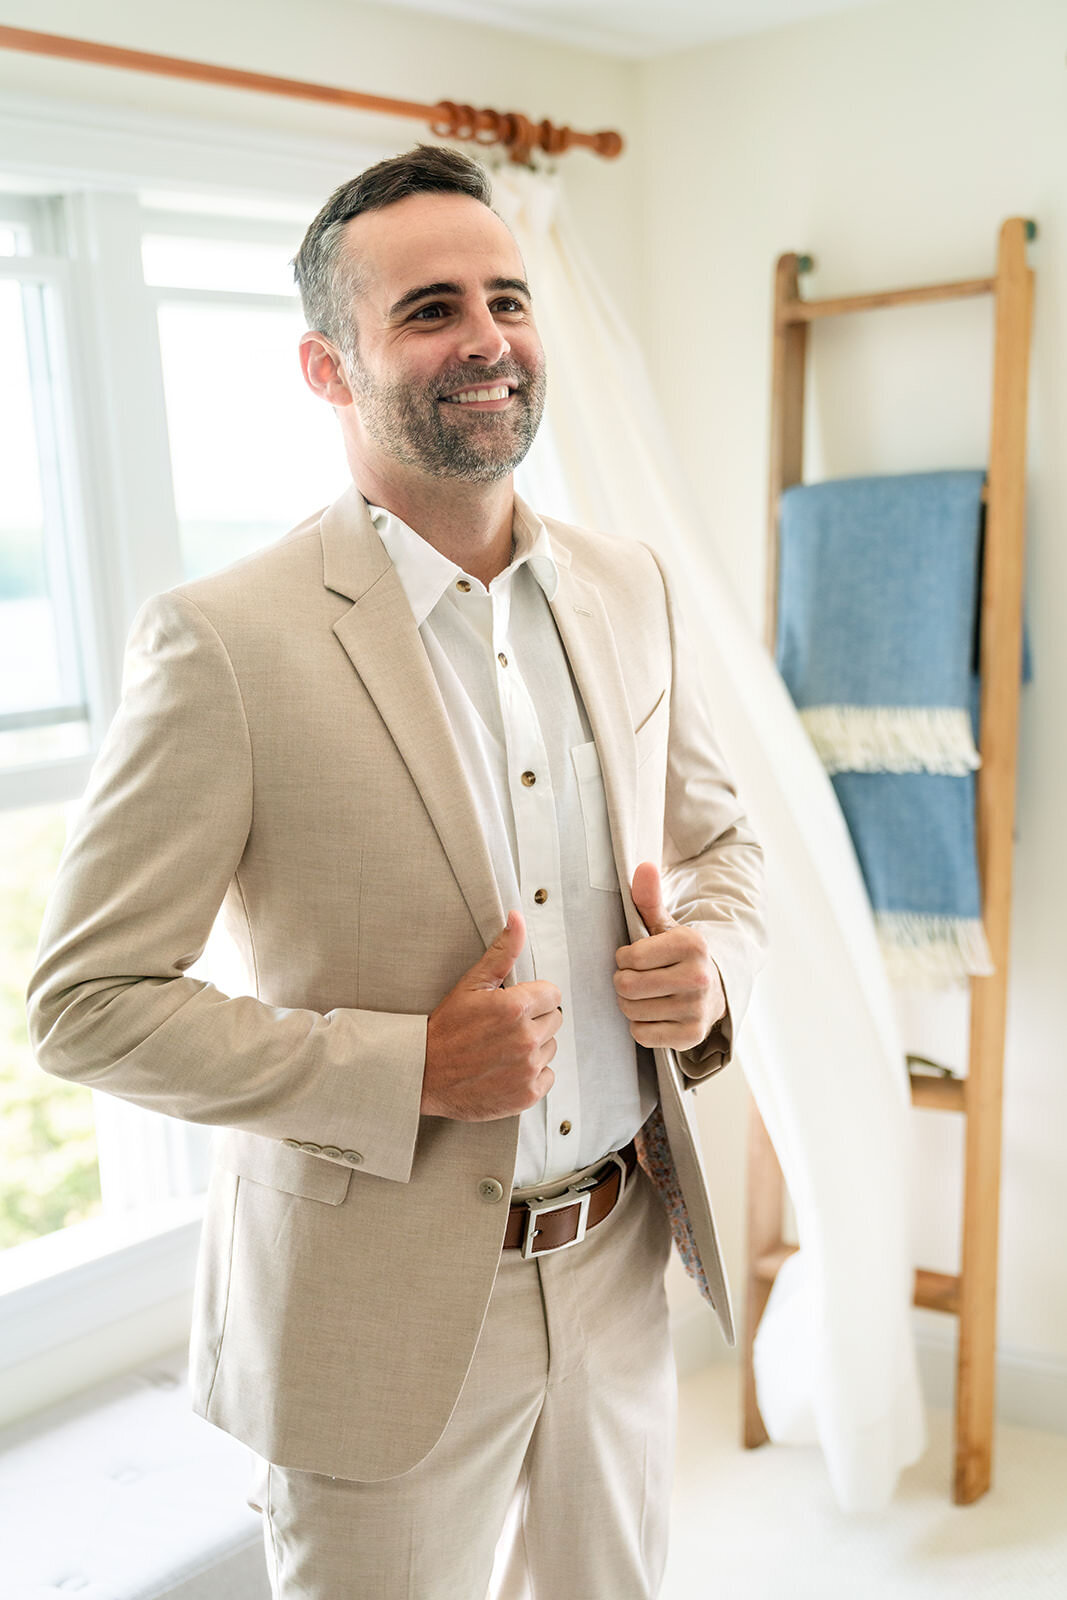 A cheerful man buttoning up his beige suit jacket, preparing for a special occasion in a sunlit room with a ladder blanket rack in the background.